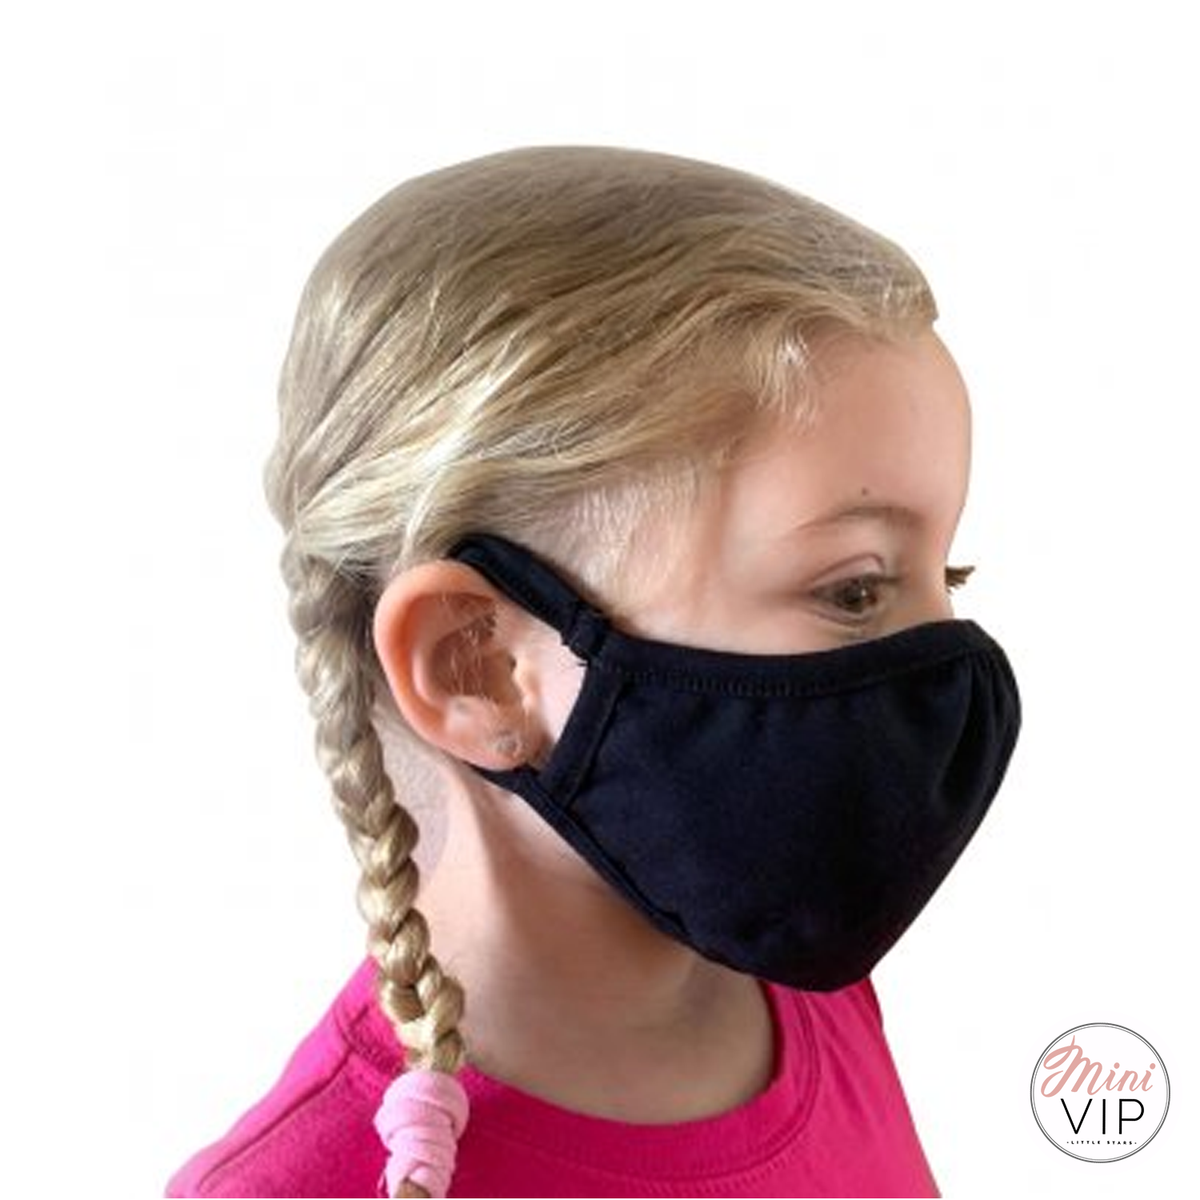 Personalised Face Mask / Covering - kids &amp; adult sizes